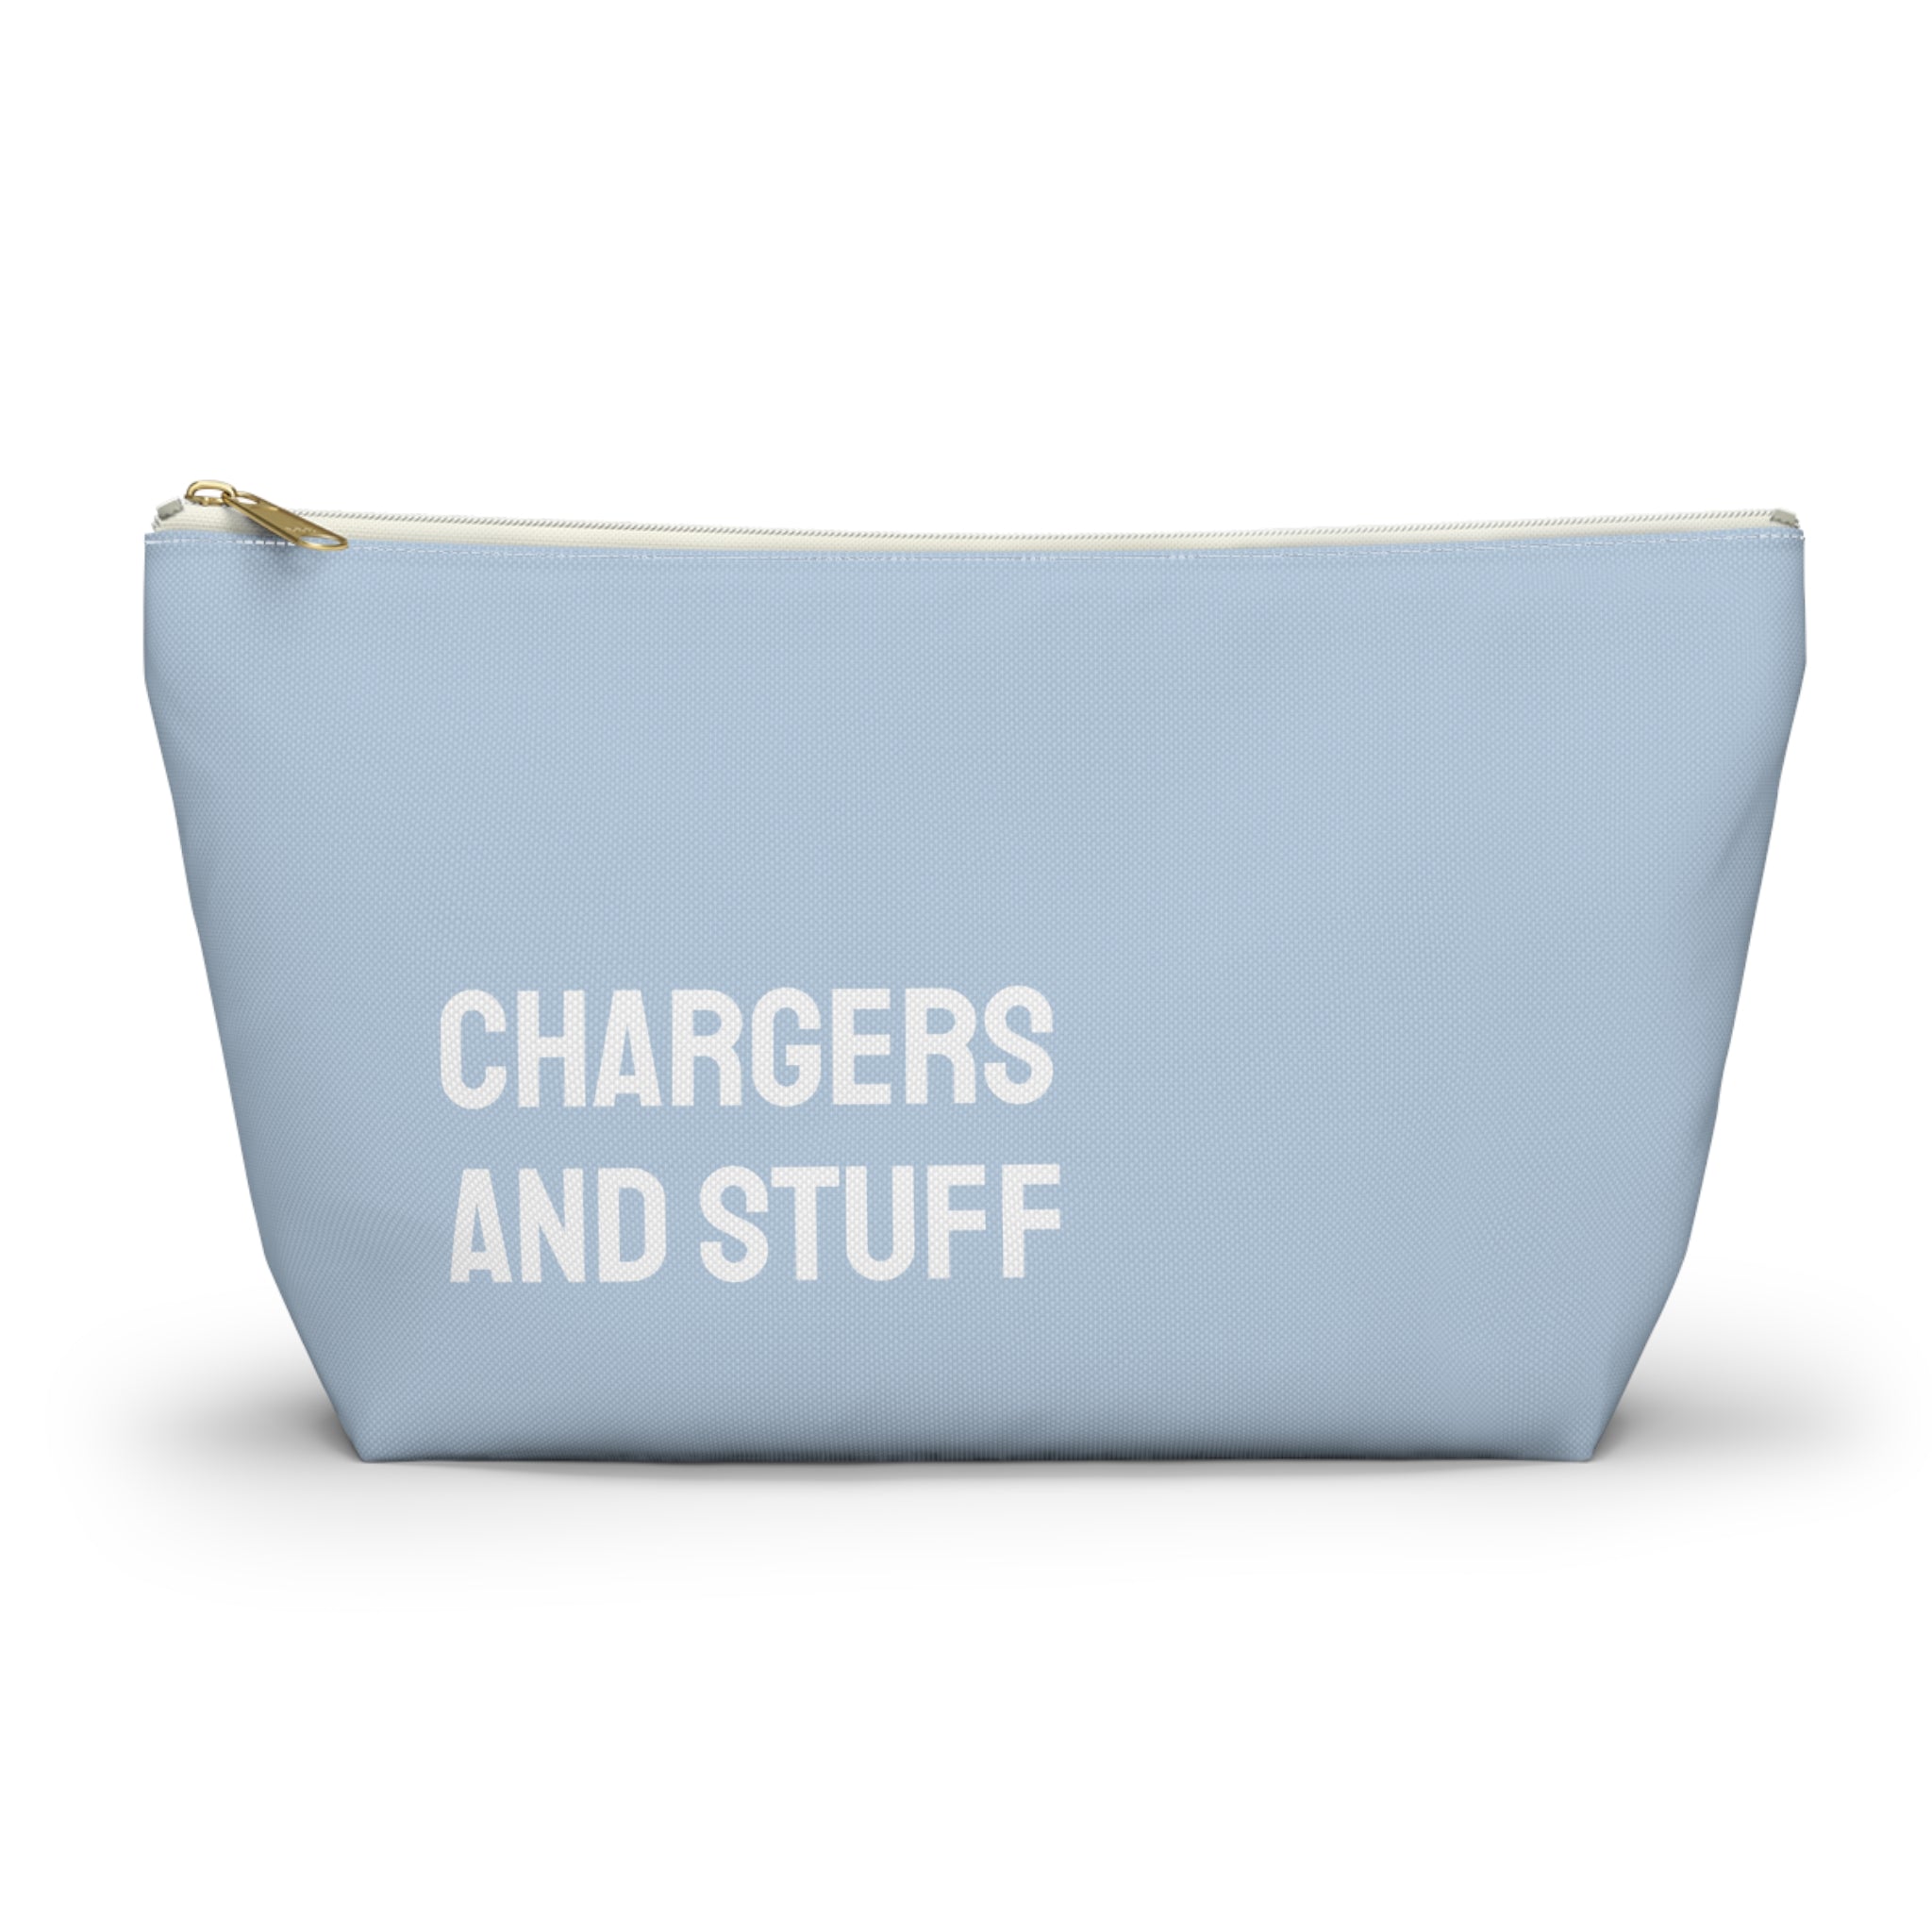 Chargers & stuff Pouch (Blue)